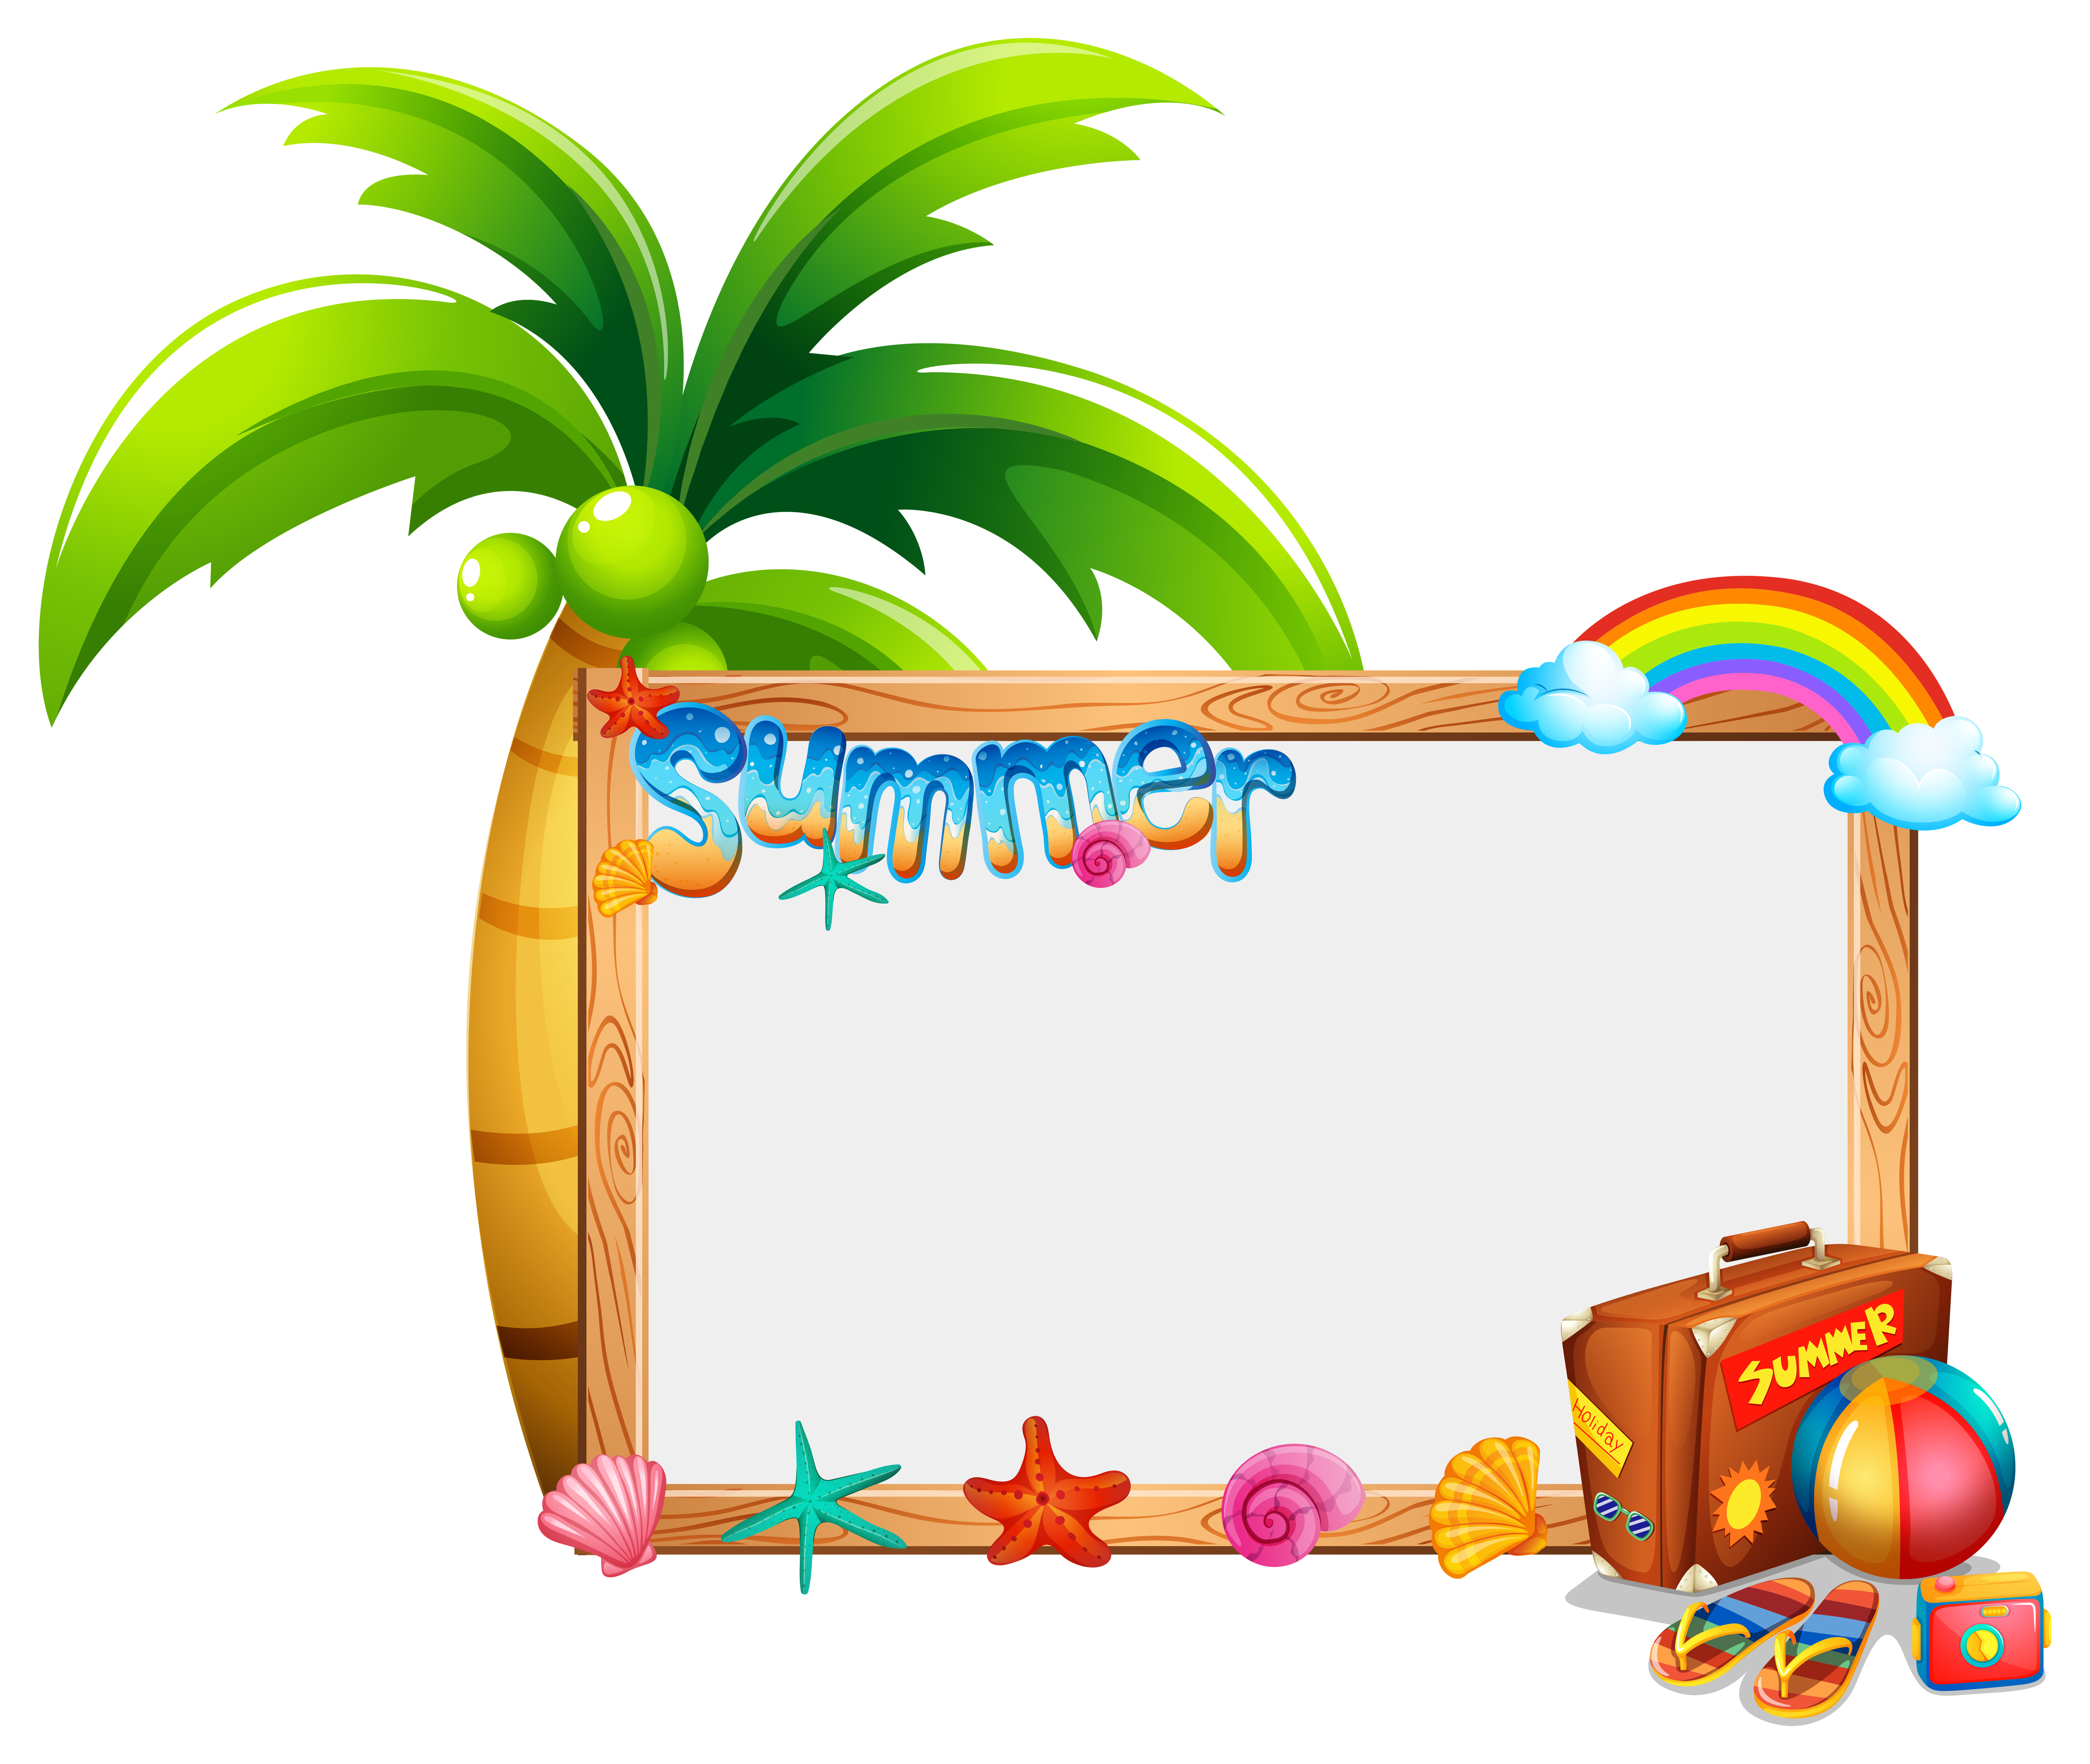 border-template-with-summer-theme-447369-vector-art-at-vecteezy